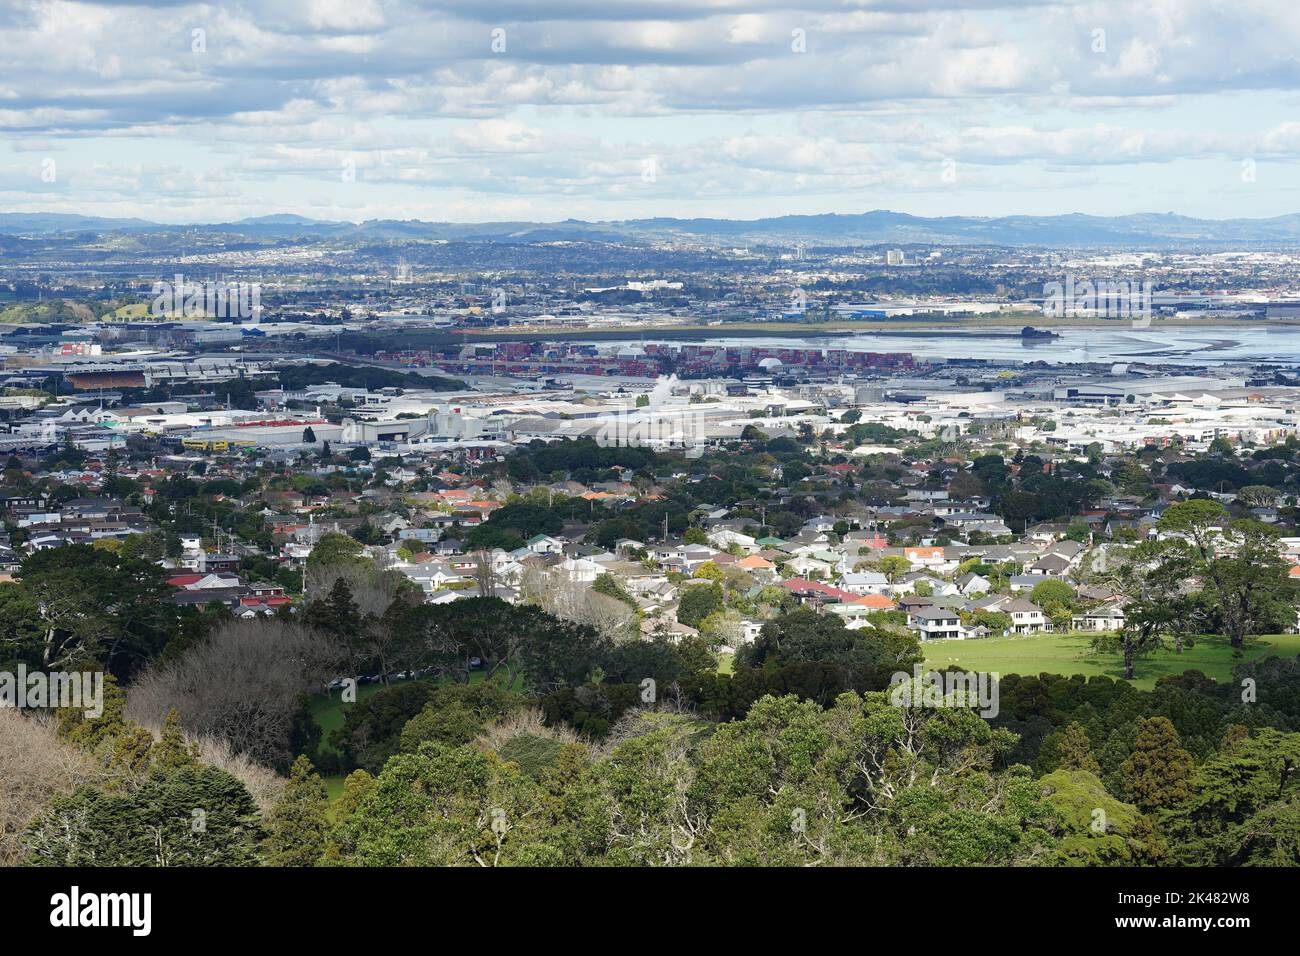 Overlooking the Auckland suburb of Penrose, New Zealand Stock Photo